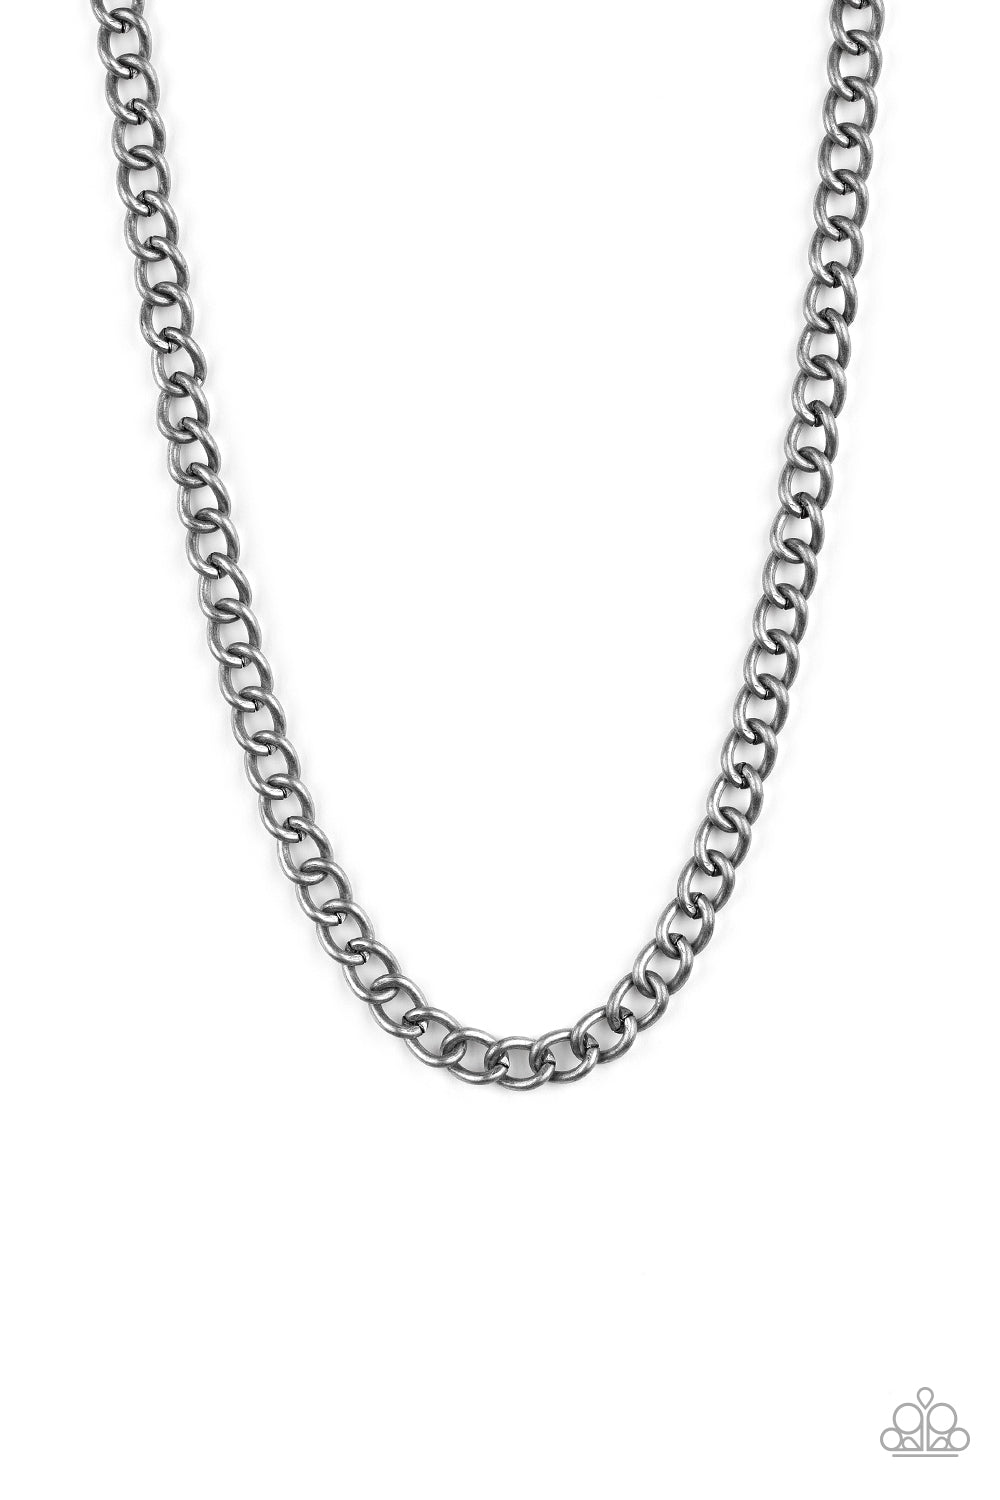 Full Court - Silver Necklace